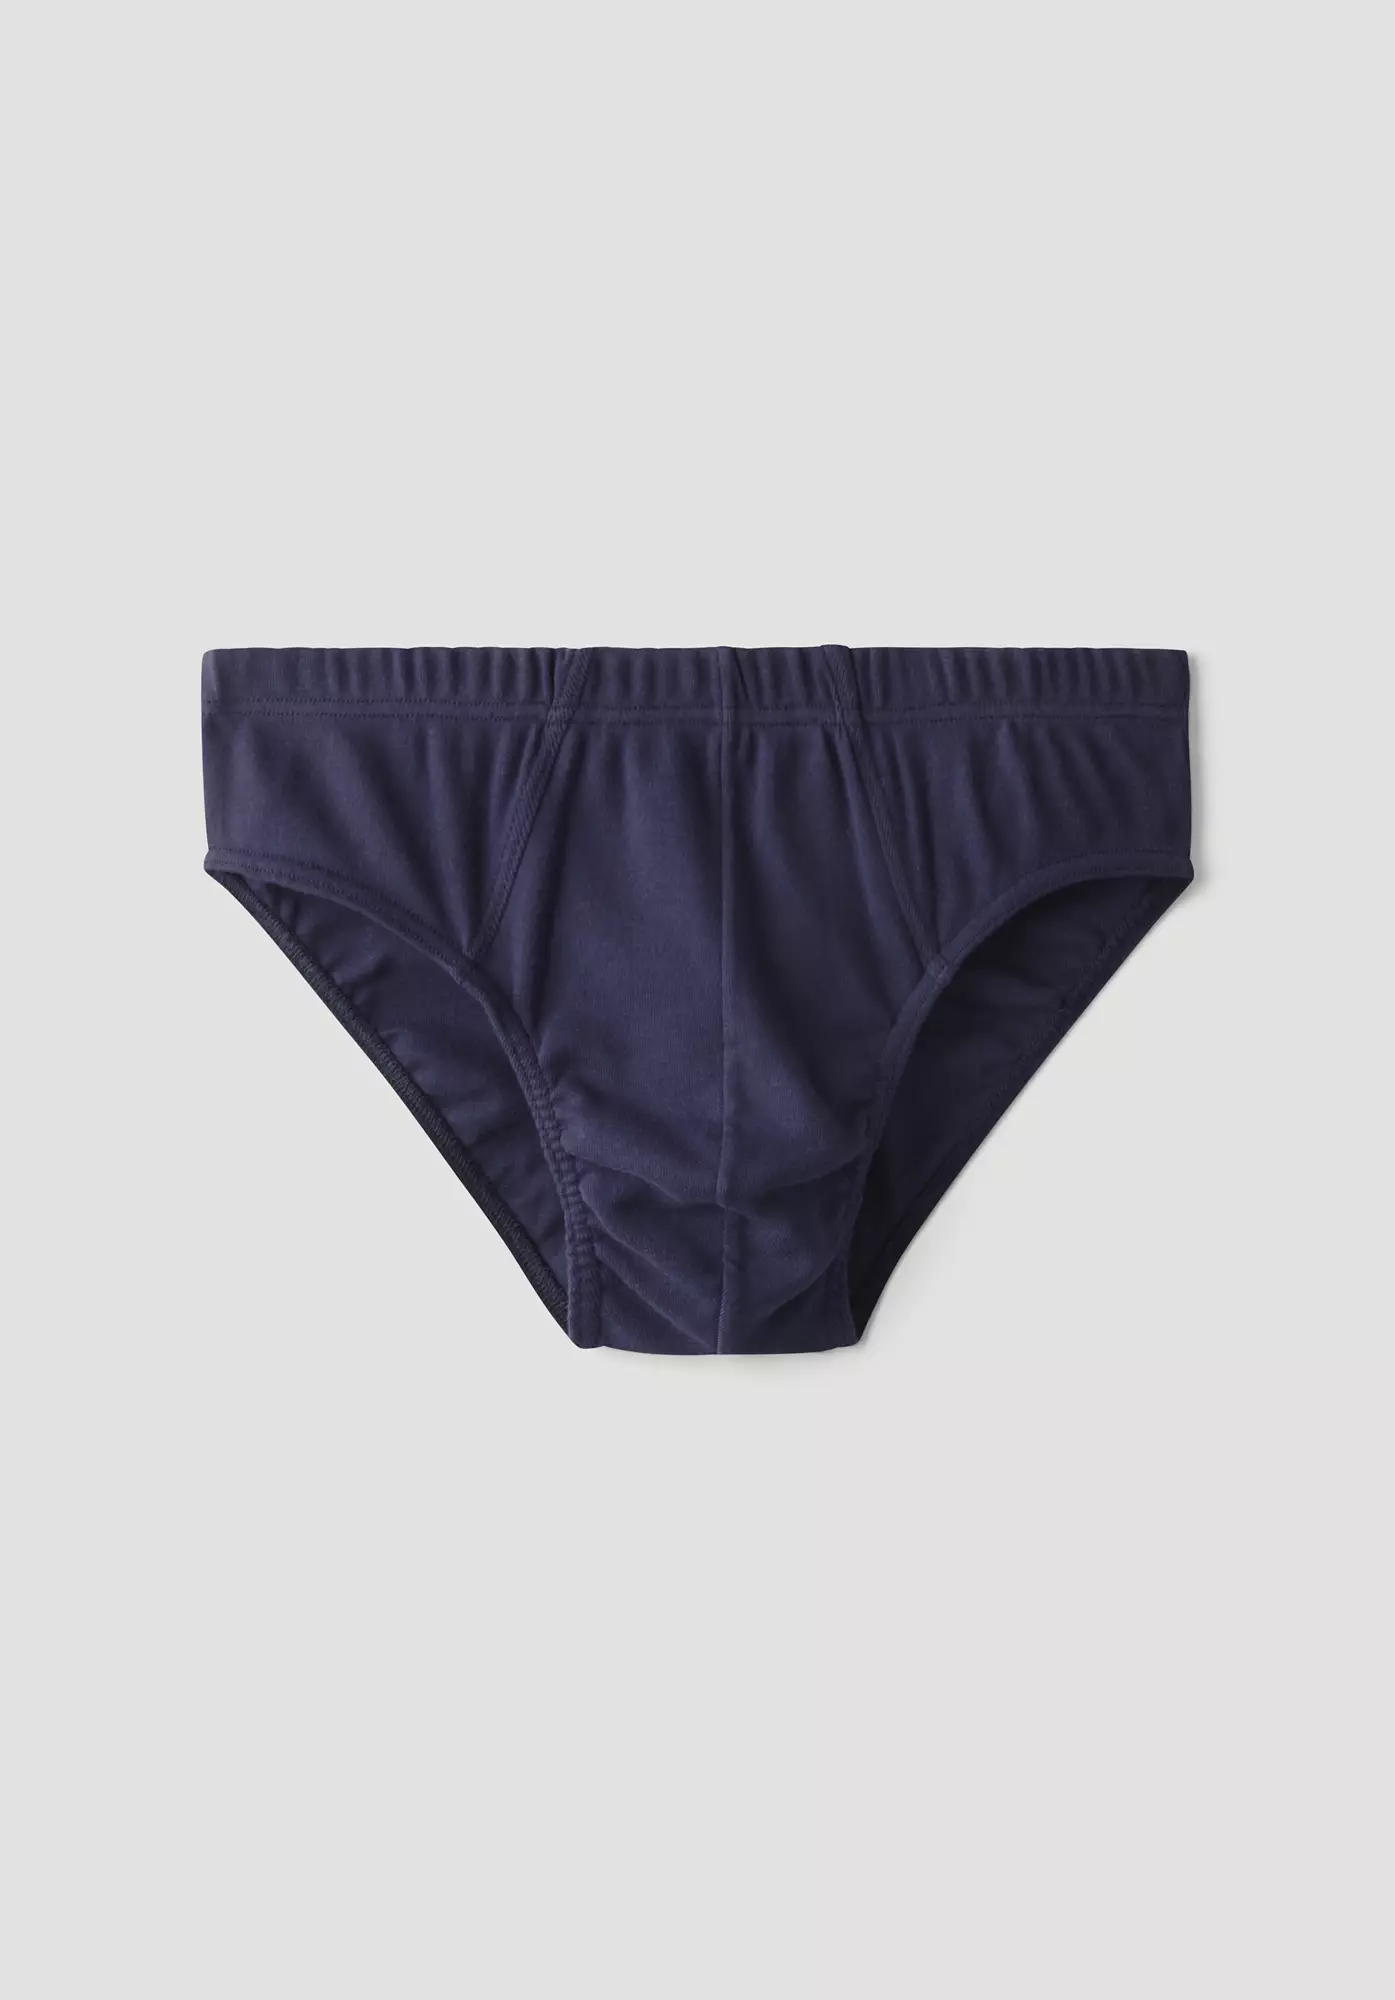 PureDAILY briefs in a set of 2 made of pure organic cotton - 2